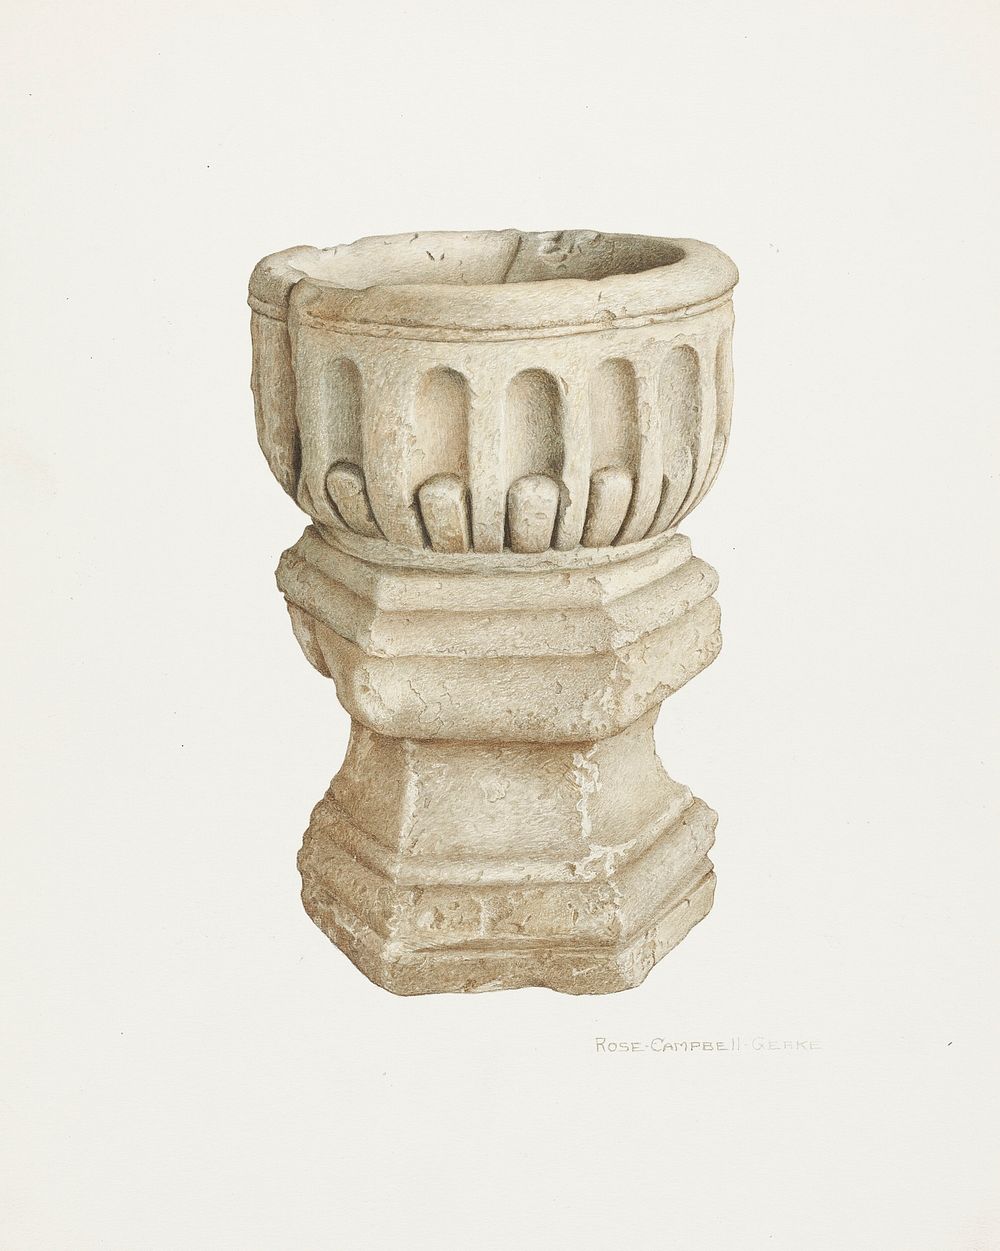 Stone Baptismal Font (ca.1940) by Rose Campbell-Gerke. Original from The National Gallery of Art. Digitally enhanced by…